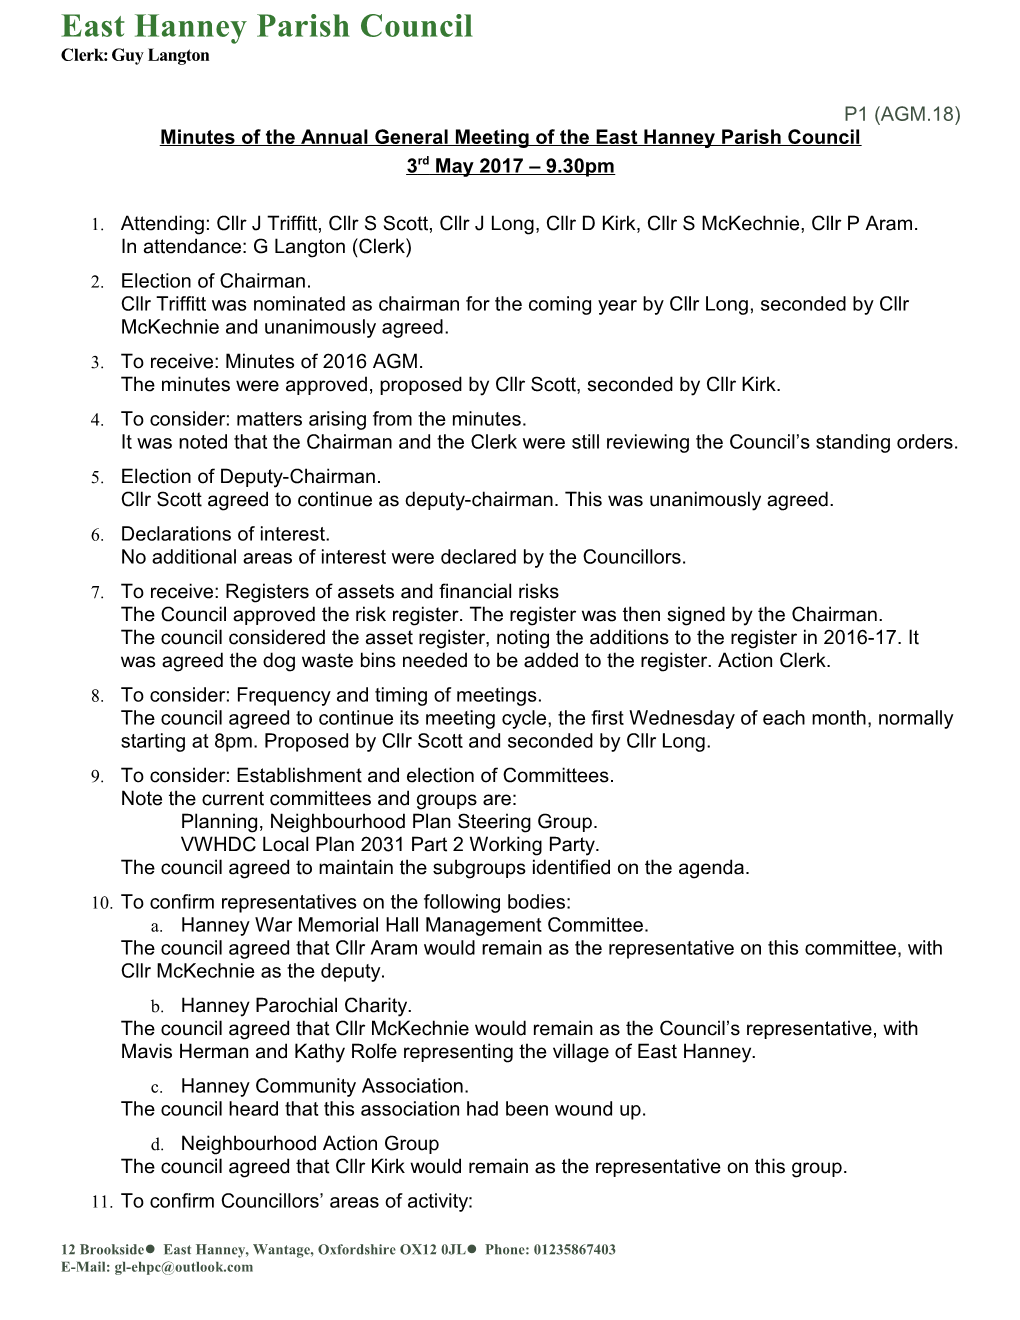 Minutes of the Annual General Meeting of the East Hanney Parish Council